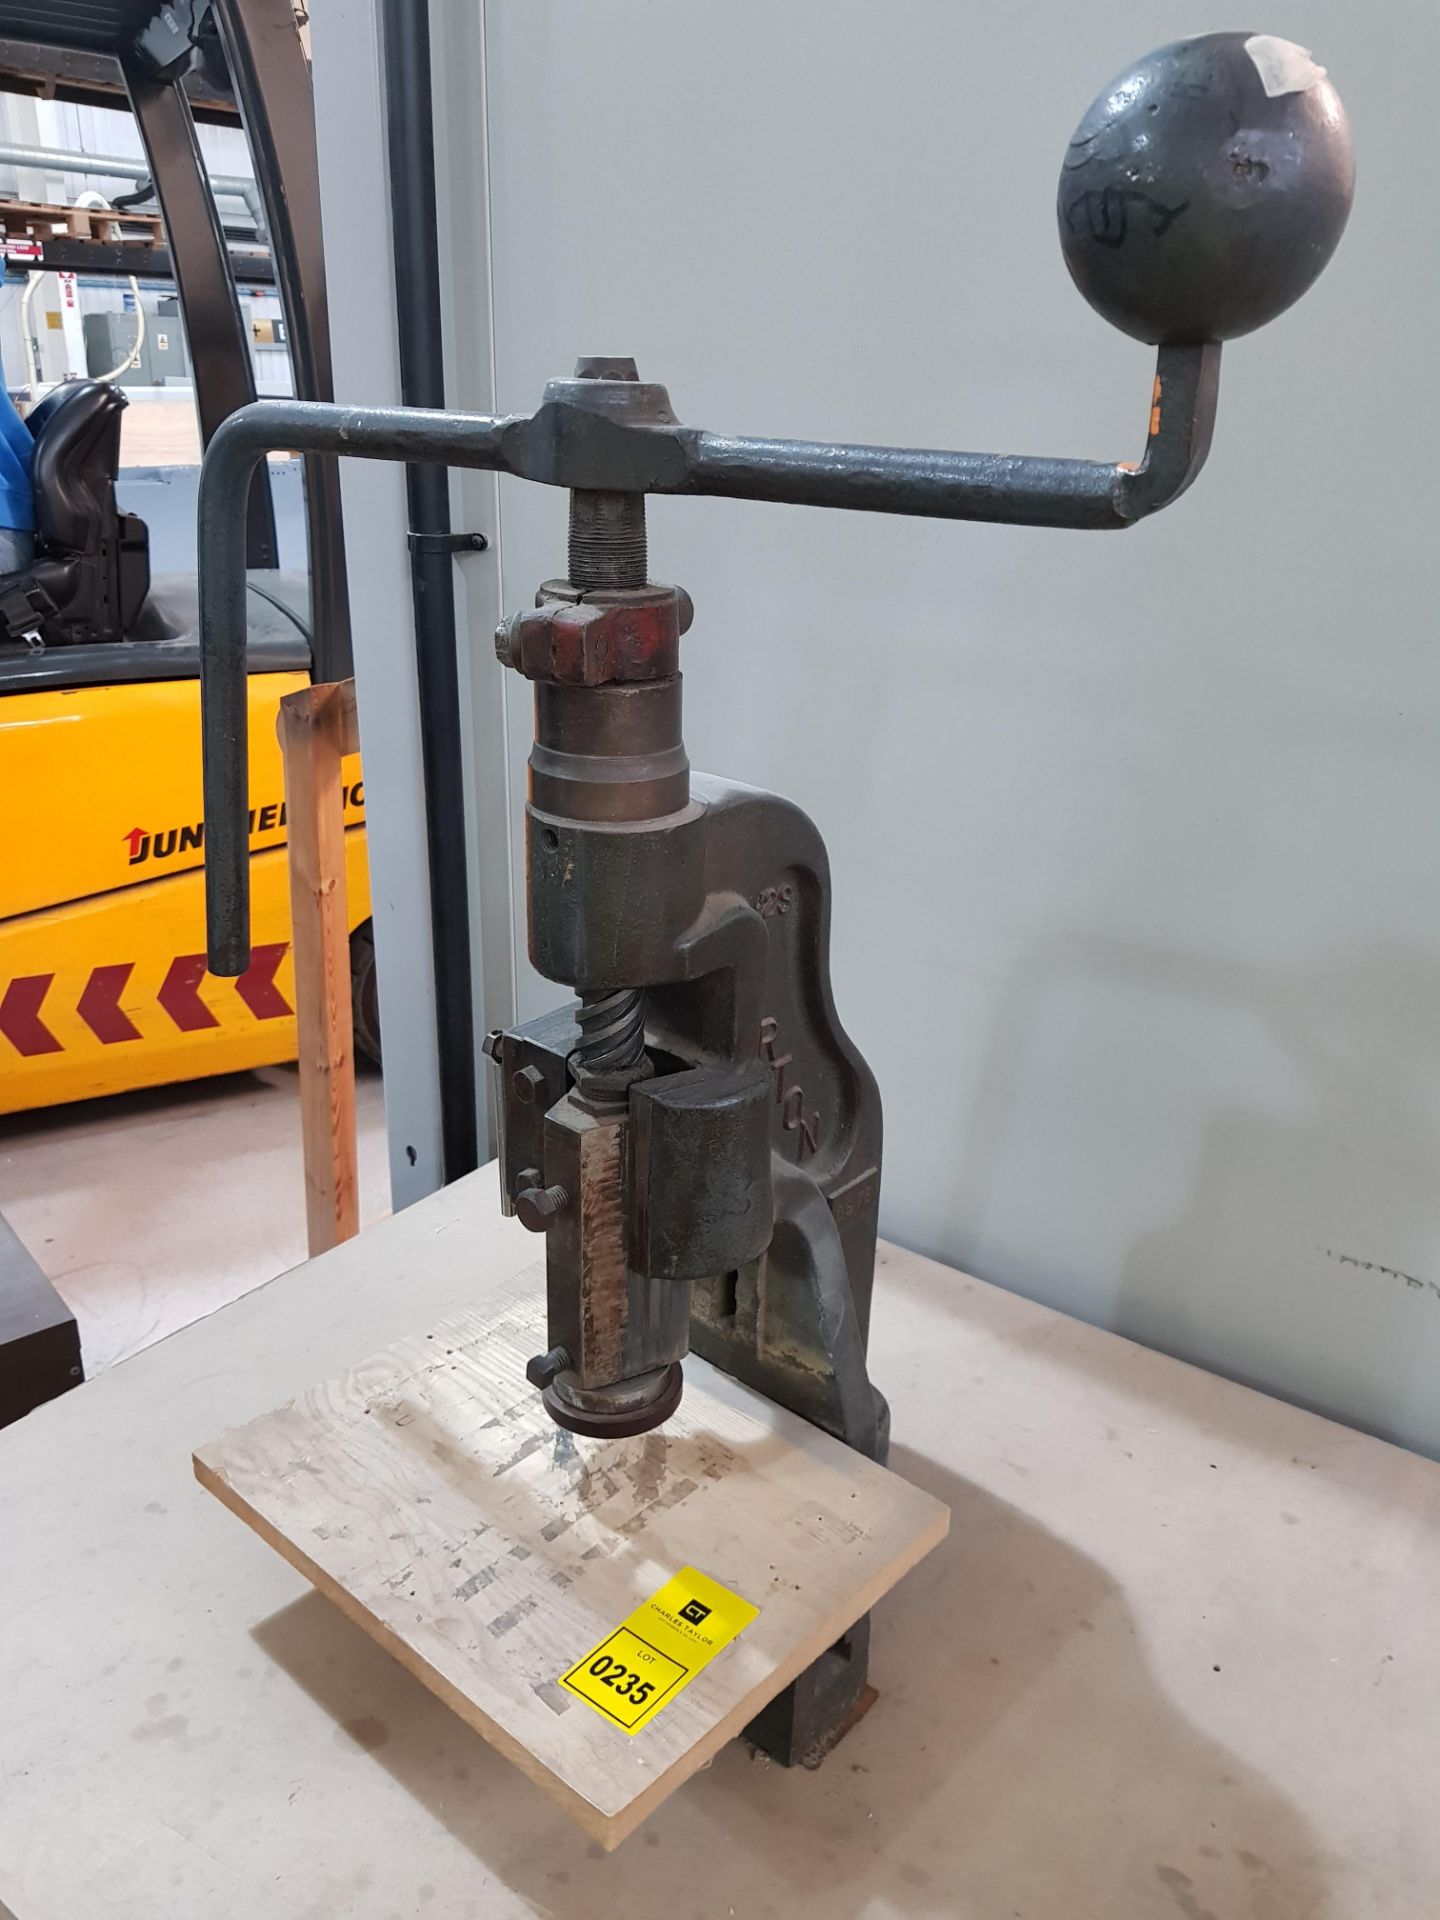 1 X NORTON NO 25 D576 MANUAL STEEL PRESS. (ASSETS LOCATED IN DENTON, MANCHESTER. VIEWING STRICTLY BY